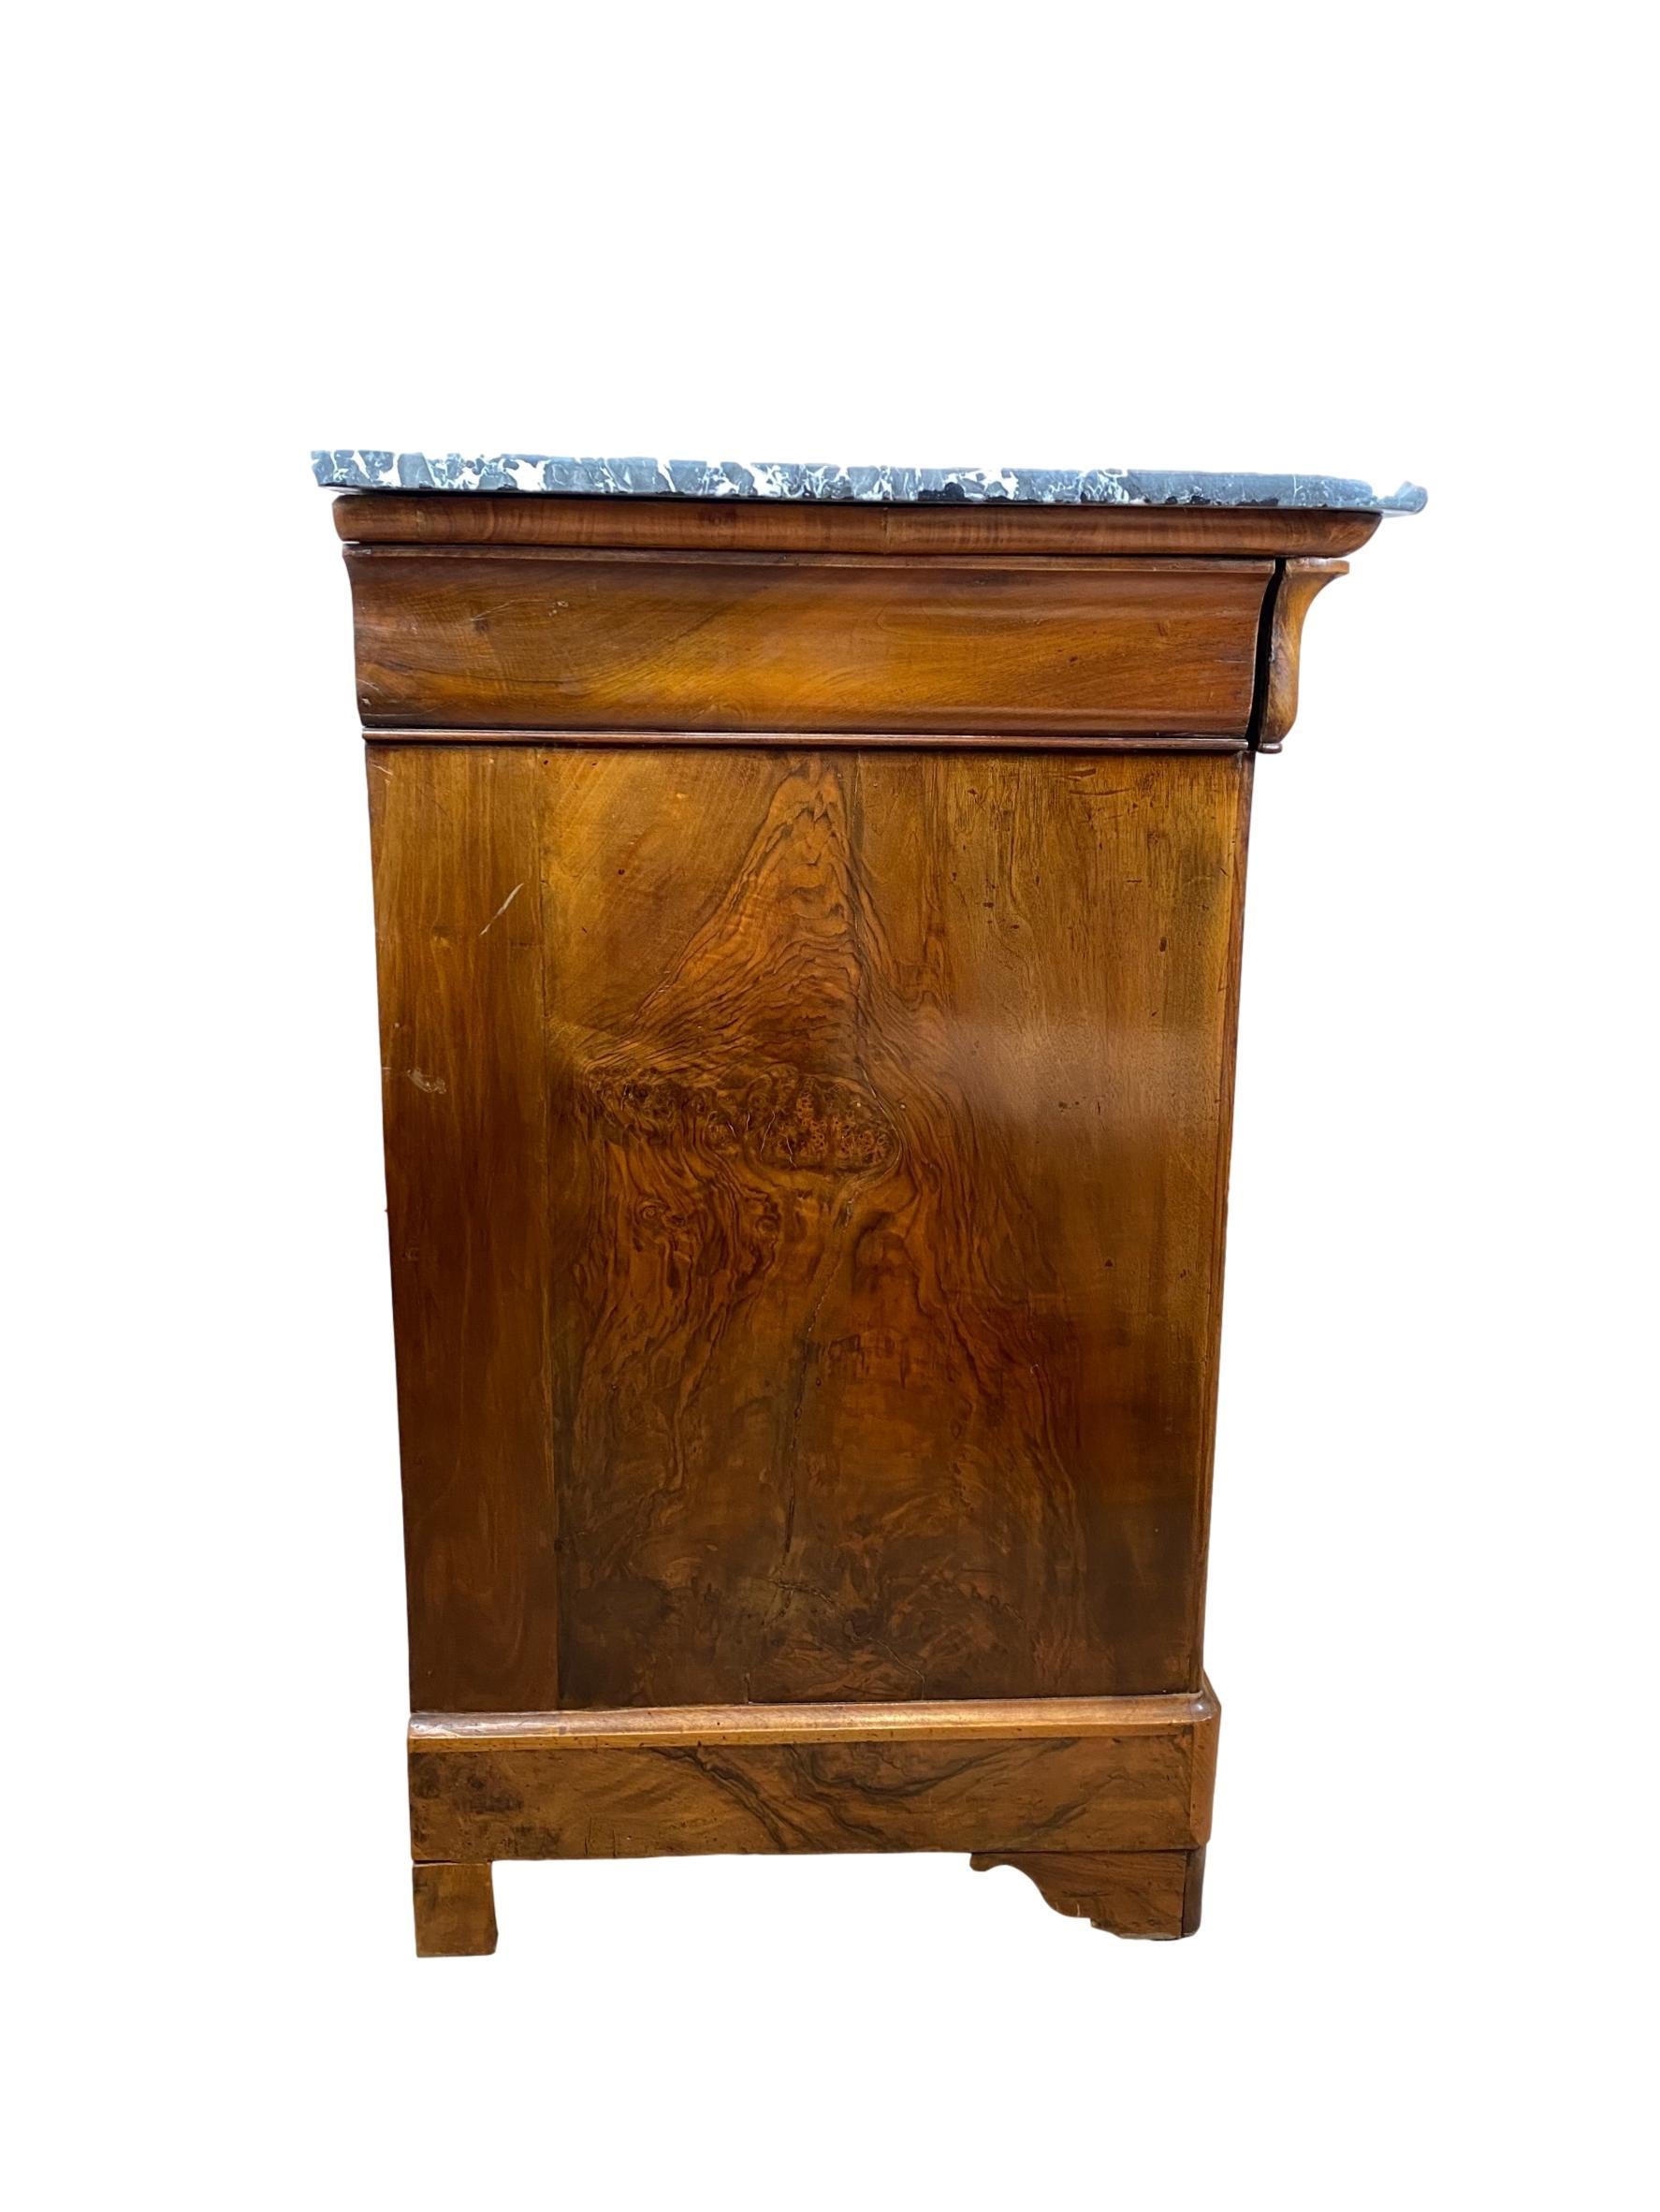 Hand-Crafted Louis Philippe Marble-Top Commode in Figured Walnut, French, circa 1840